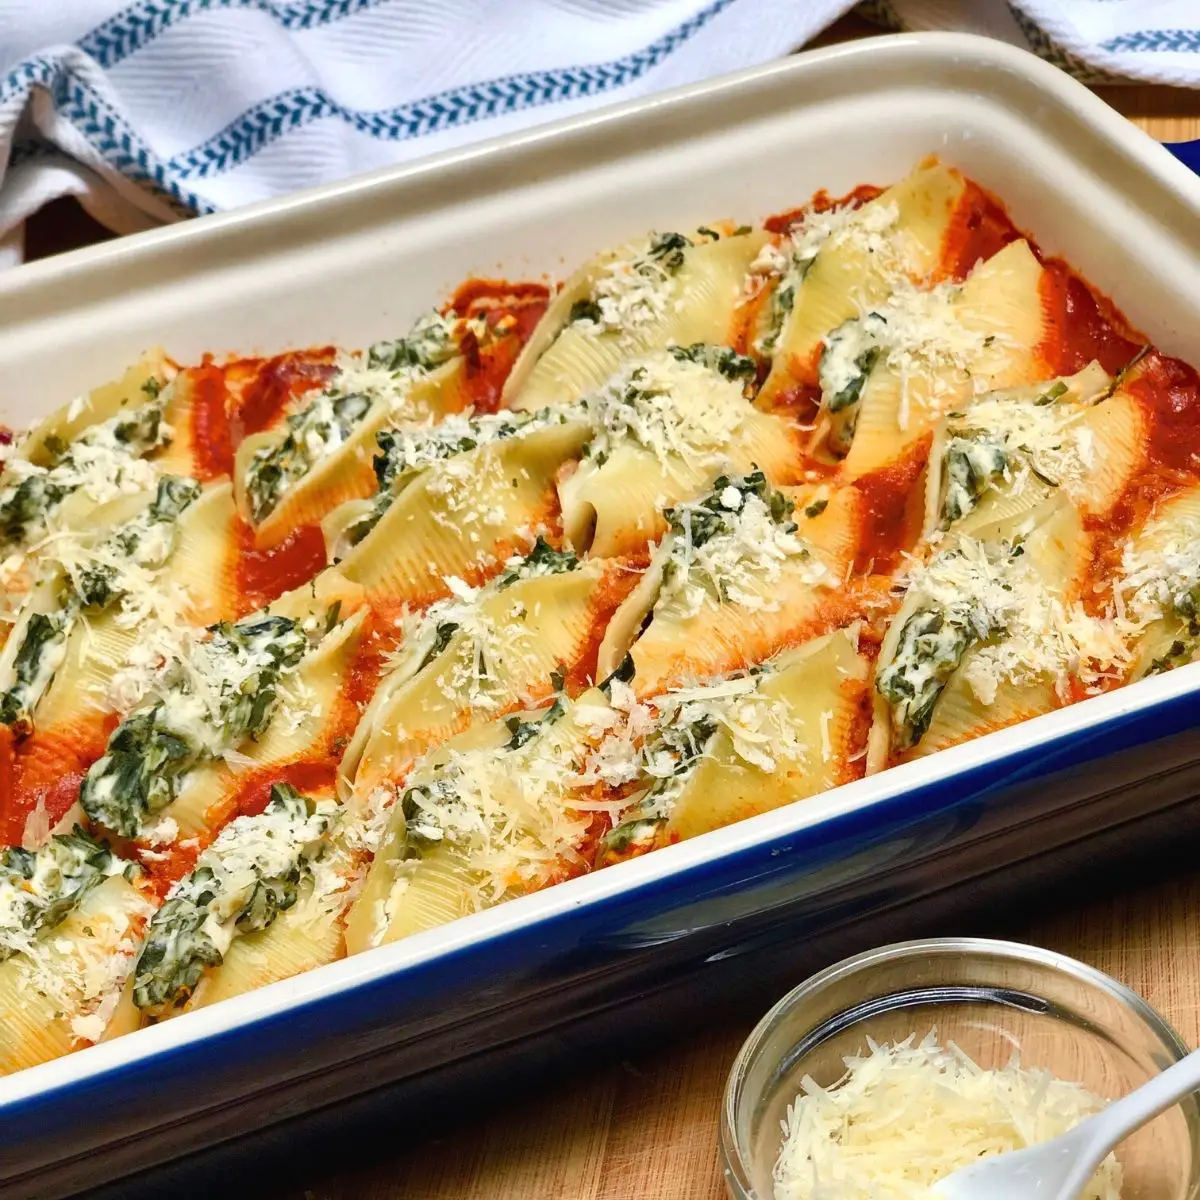 The most delicious vegan stuffed shells with spinach and cheese, baked in a rich marinara sauce..